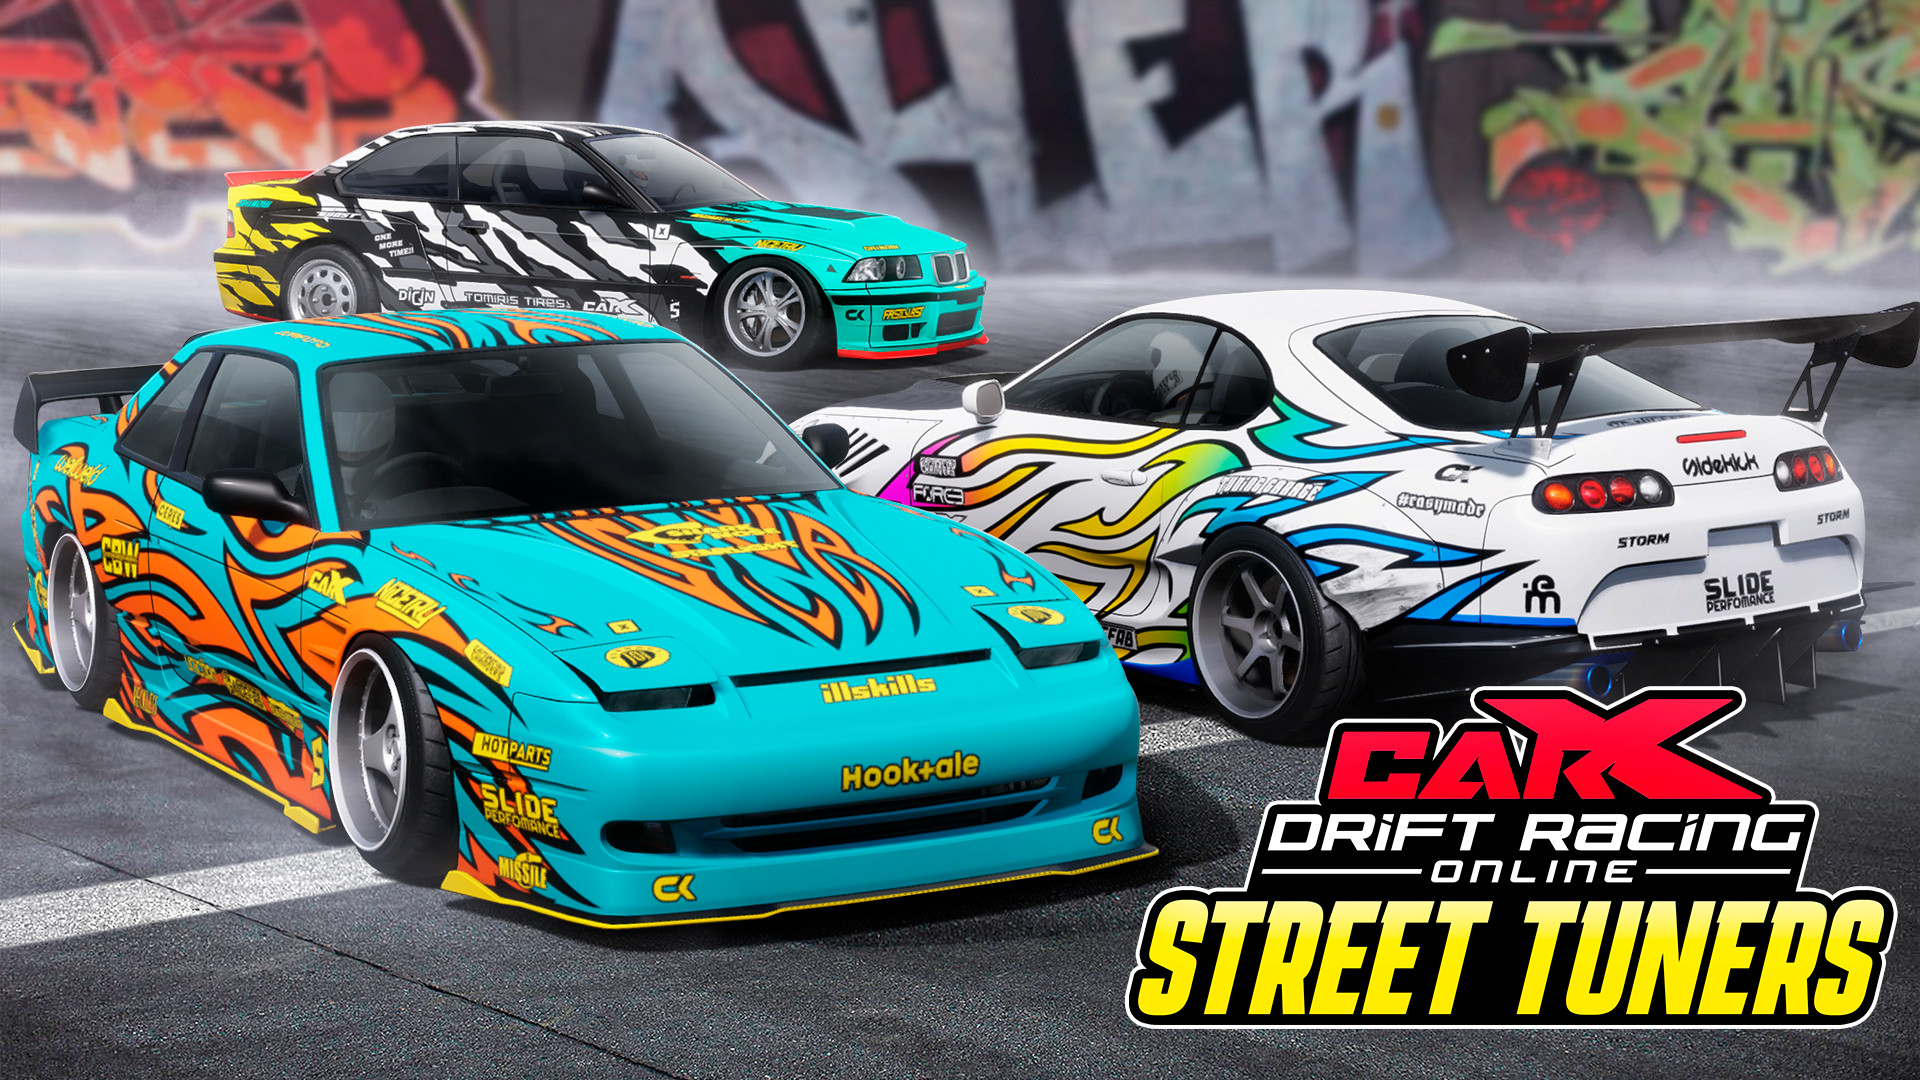 Another great free drifting app on the app store. Car X Drift